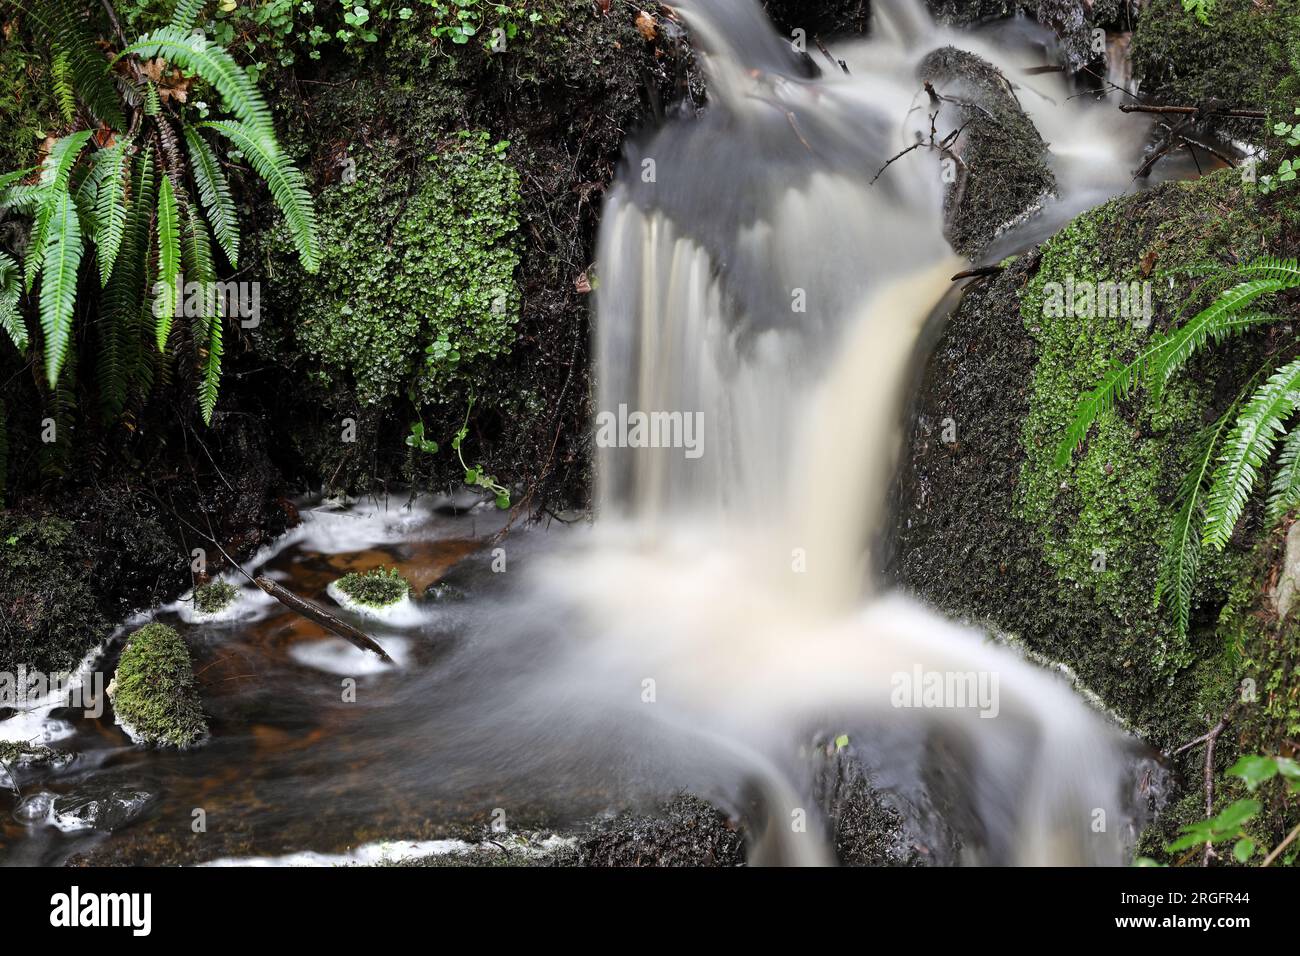 Small waterfall in a damp woodland with Common Polypody (Polypodium vulgare) ferns growing alongside, North Pennines, County Durham, UK Stock Photo